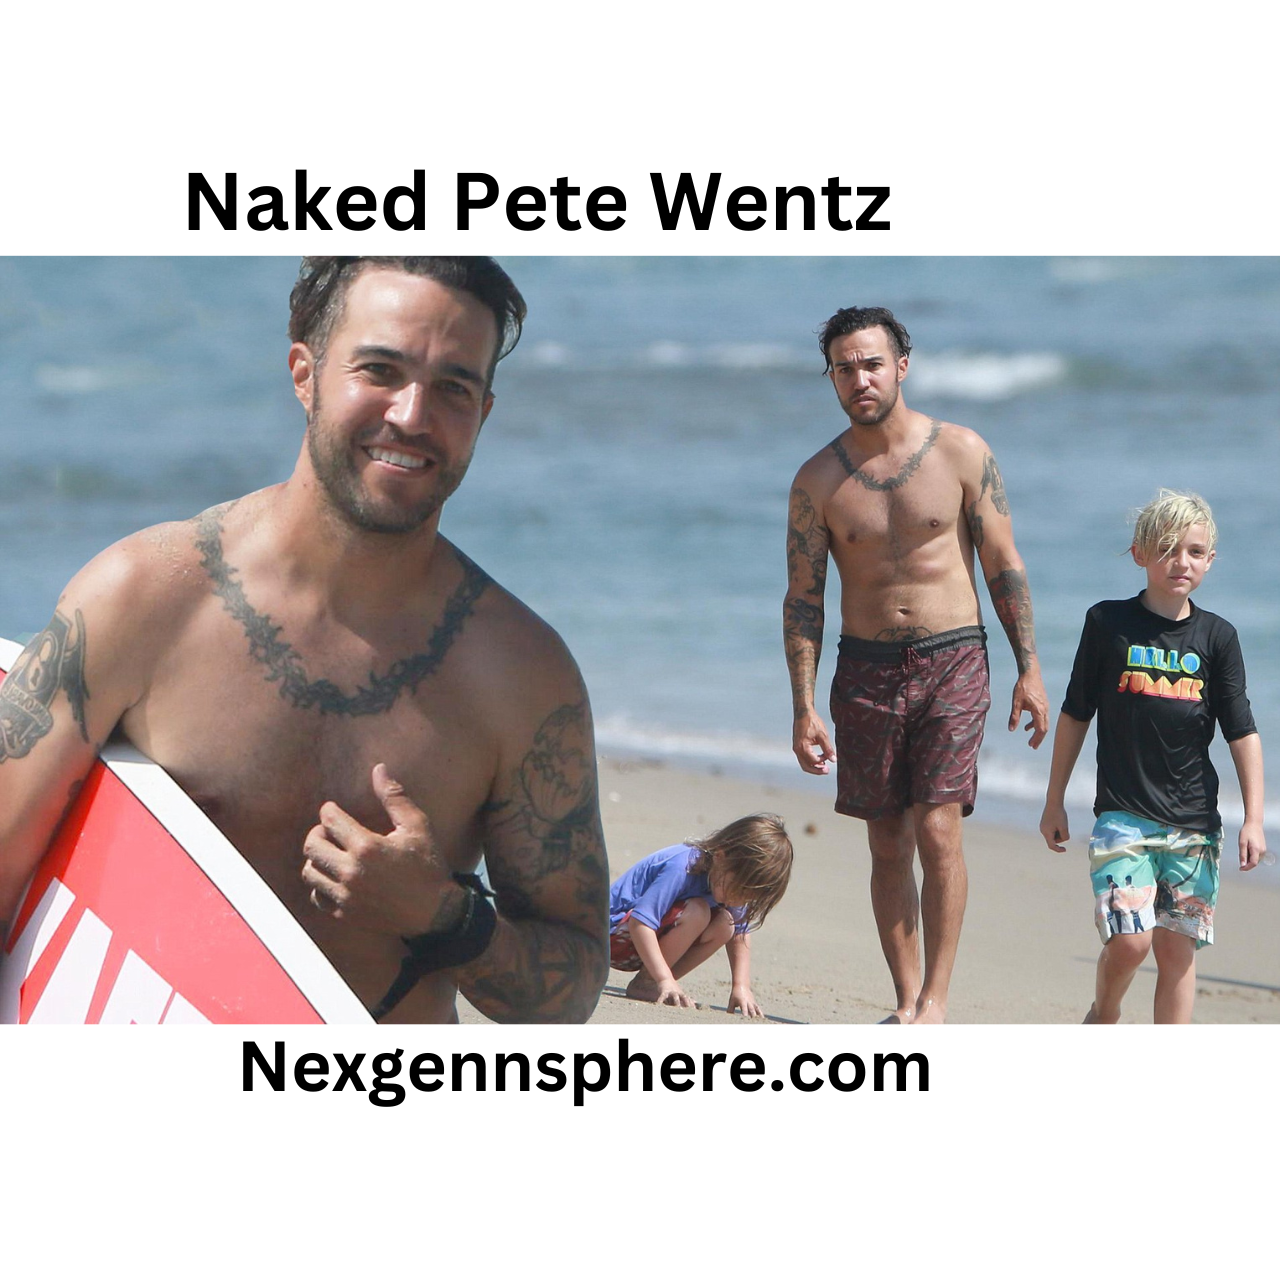 Naked Pete Wentz: The Untold Story